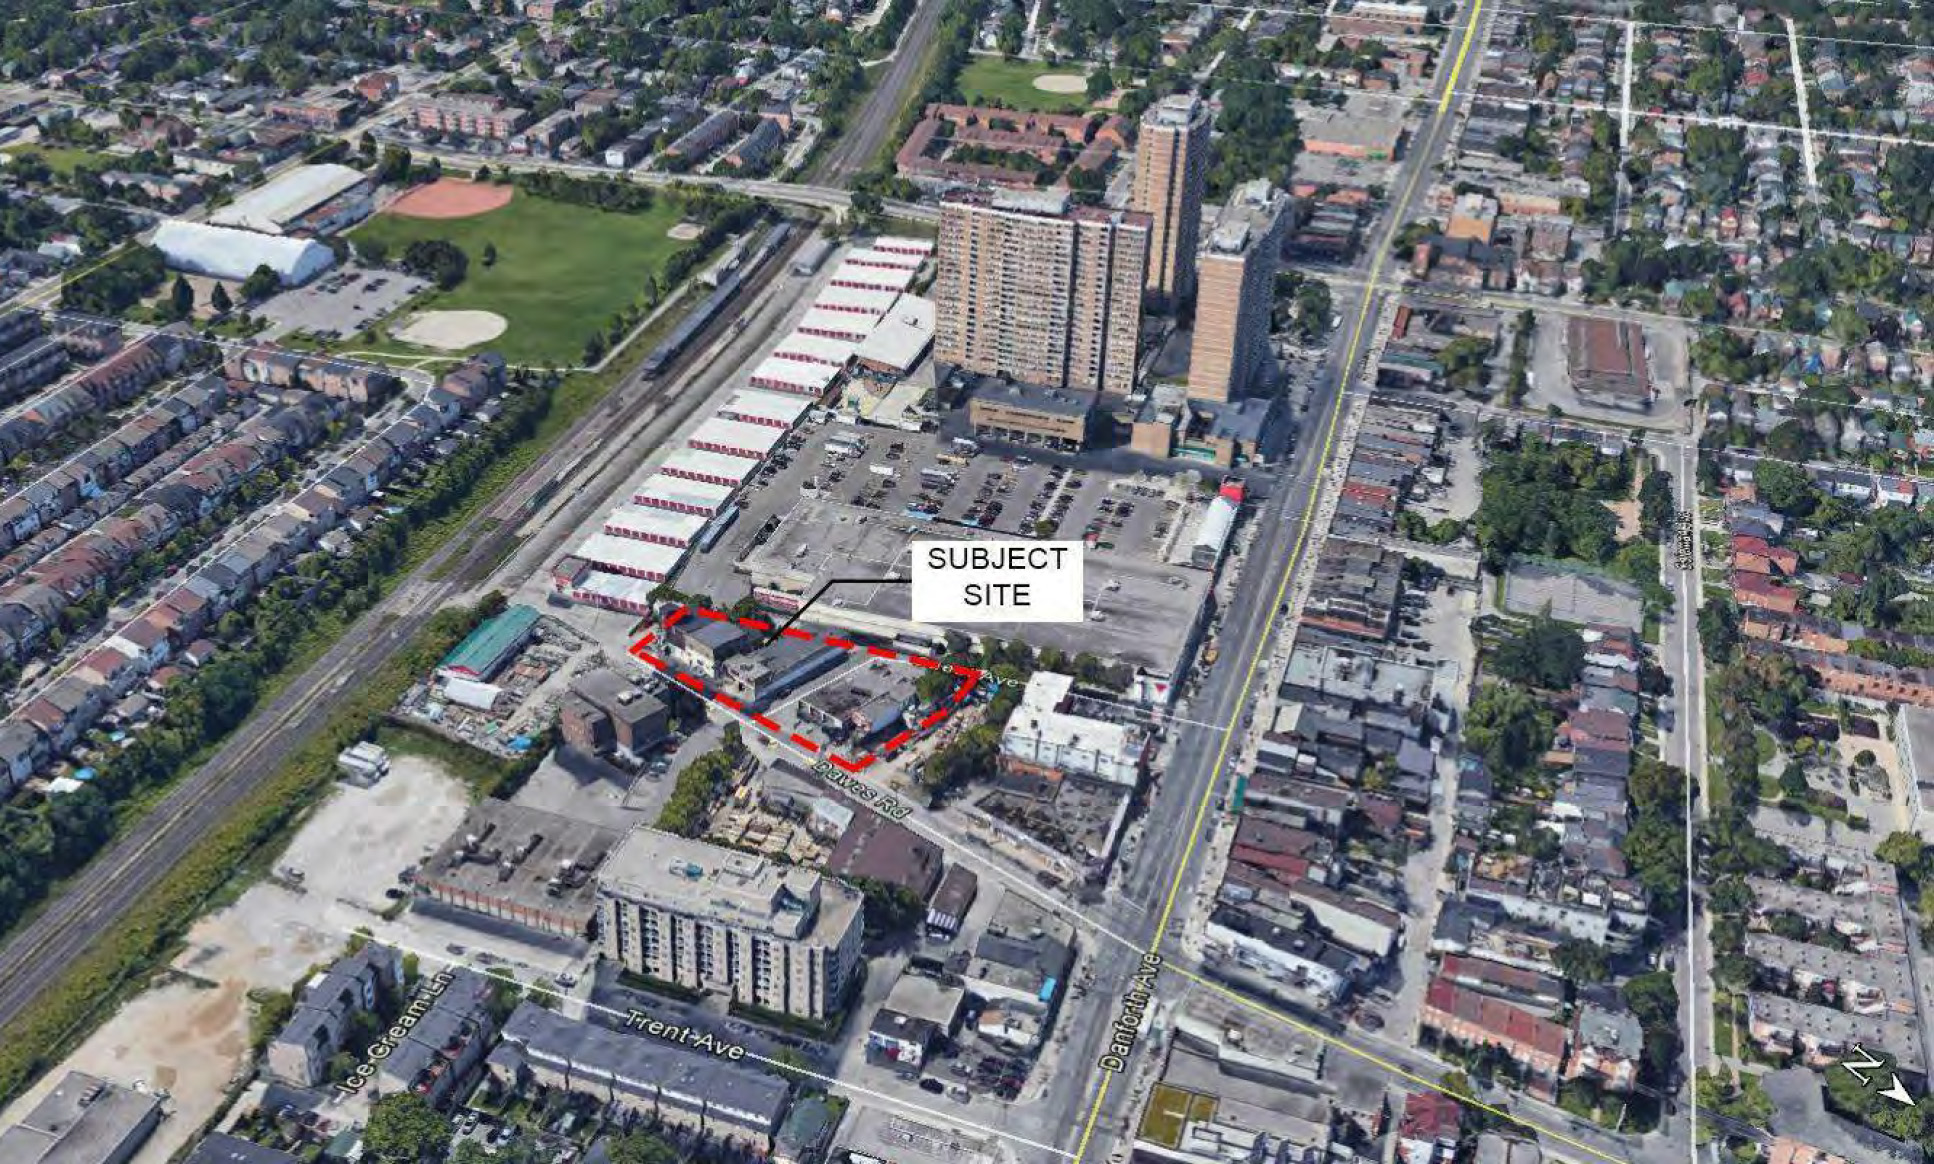 Site, 10-30 Dawes Rd, Toronto, designed by IBI Group for Marlin Spring Developments